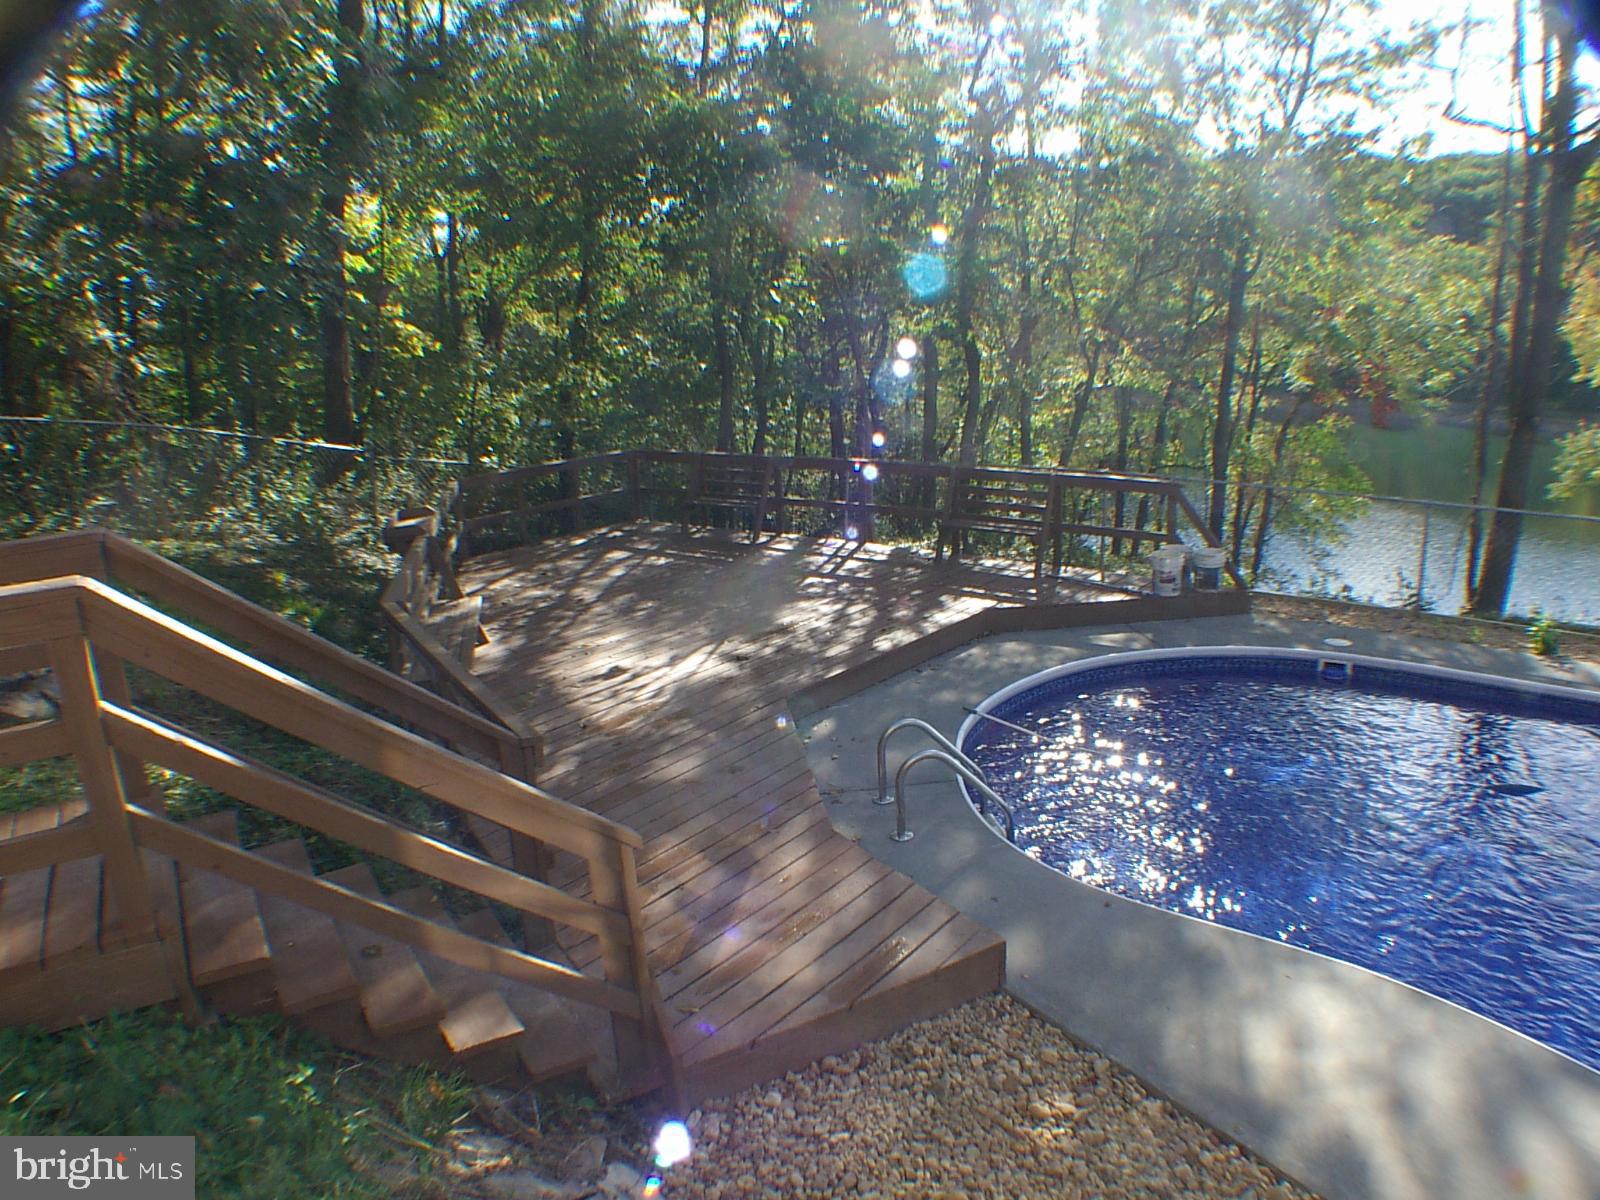 a view of a backyard with street view